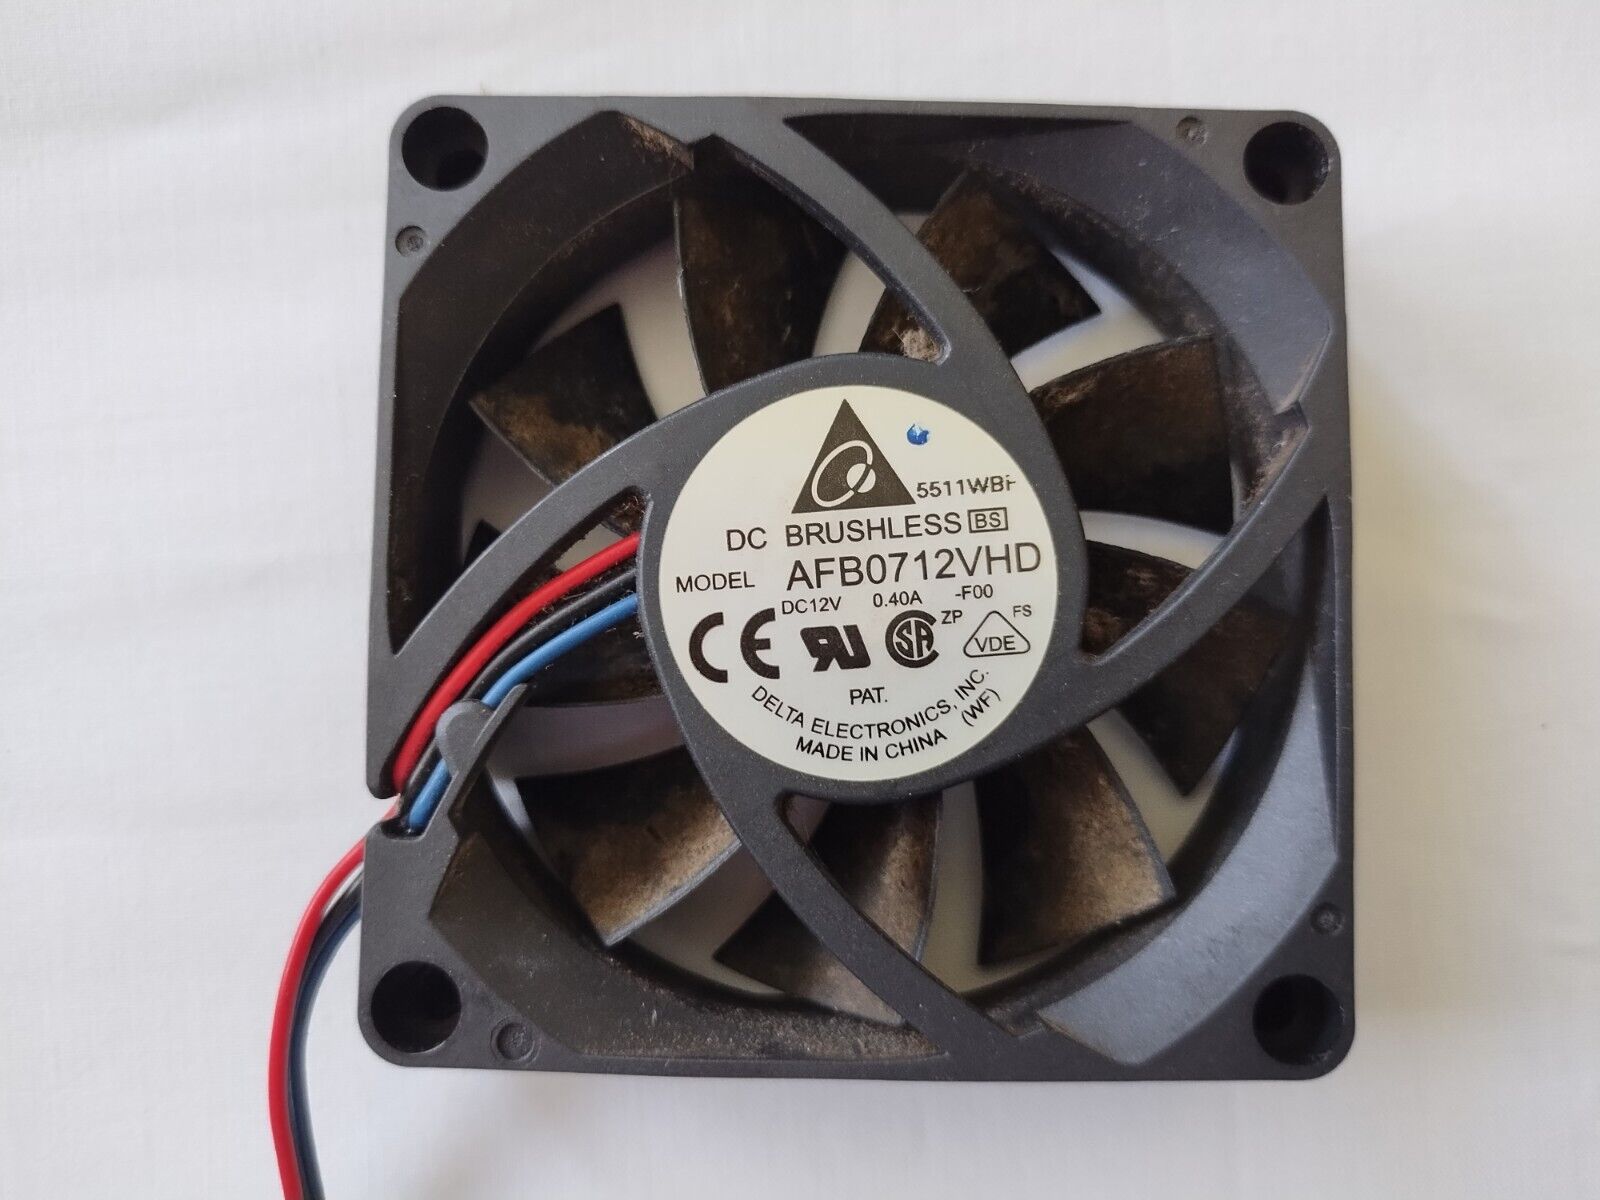 Delta 12v DC 0.40a 70x20mm 3-Wire Fan AFB0712VHD-F00 TaiSol 102238 Ball Bearing